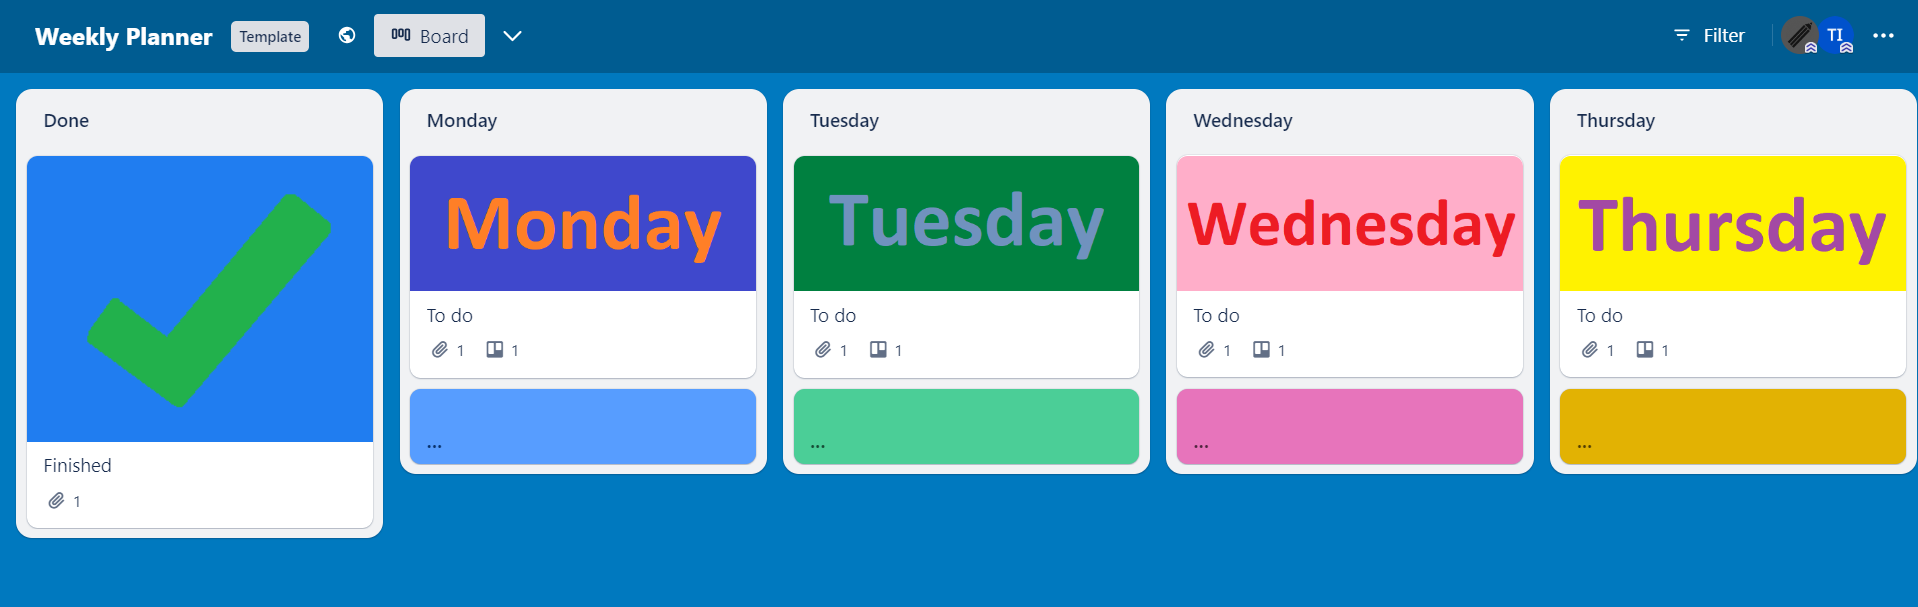 Trello - a highly visual digital planner that syncs with Google Calendar